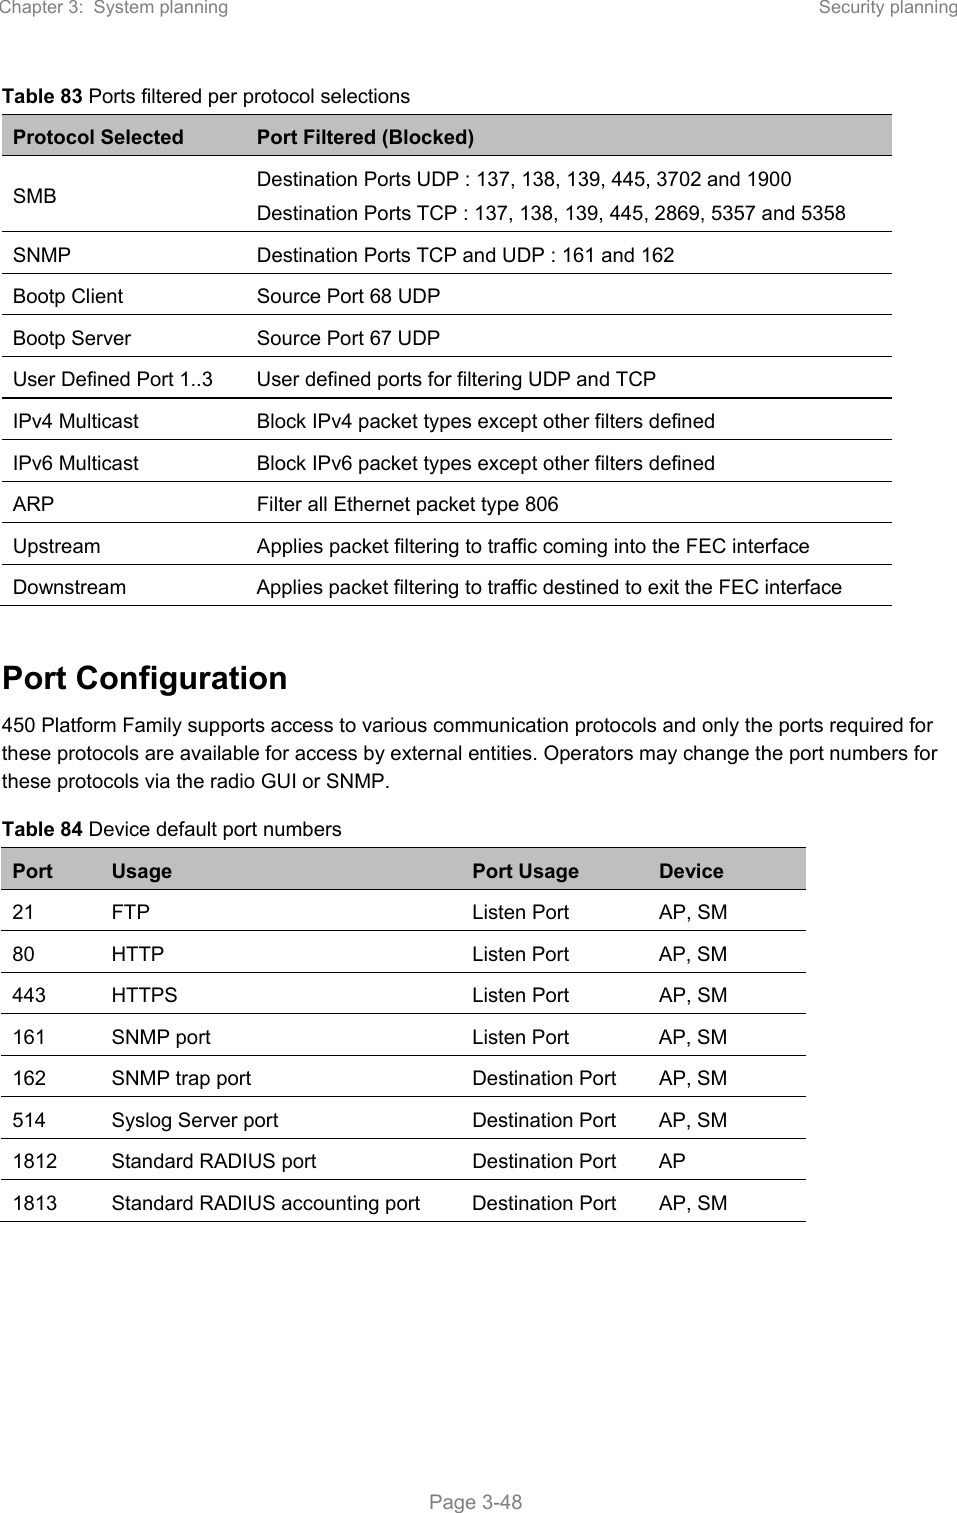 Chapter 3:  System planning  Security planning   Page 3-48 Table 83 Ports filtered per protocol selections   Port Configuration 450 Platform Family supports access to various communication protocols and only the ports required for these protocols are available for access by external entities. Operators may change the port numbers for these protocols via the radio GUI or SNMP. Table 84 Device default port numbers Port  Usage  Port Usage  Device 21  FTP  Listen Port  AP, SM 80  HTTP  Listen Port  AP, SM 443  HTTPS  Listen Port  AP, SM 161  SNMP port  Listen Port  AP, SM 162  SNMP trap port  Destination Port  AP, SM 514  Syslog Server port  Destination Port  AP, SM 1812  Standard RADIUS port  Destination Port  AP 1813  Standard RADIUS accounting port  Destination Port  AP, SM    Protocol Selected  Port Filtered (Blocked) SMB  Destination Ports UDP : 137, 138, 139, 445, 3702 and 1900 Destination Ports TCP : 137, 138, 139, 445, 2869, 5357 and 5358 SNMP  Destination Ports TCP and UDP : 161 and 162 Bootp Client  Source Port 68 UDP Bootp Server  Source Port 67 UDP User Defined Port 1..3  User defined ports for filtering UDP and TCP IPv4 Multicast  Block IPv4 packet types except other filters defined IPv6 Multicast  Block IPv6 packet types except other filters defined ARP  Filter all Ethernet packet type 806 Upstream   Applies packet filtering to traffic coming into the FEC interface Downstream  Applies packet filtering to traffic destined to exit the FEC interface 